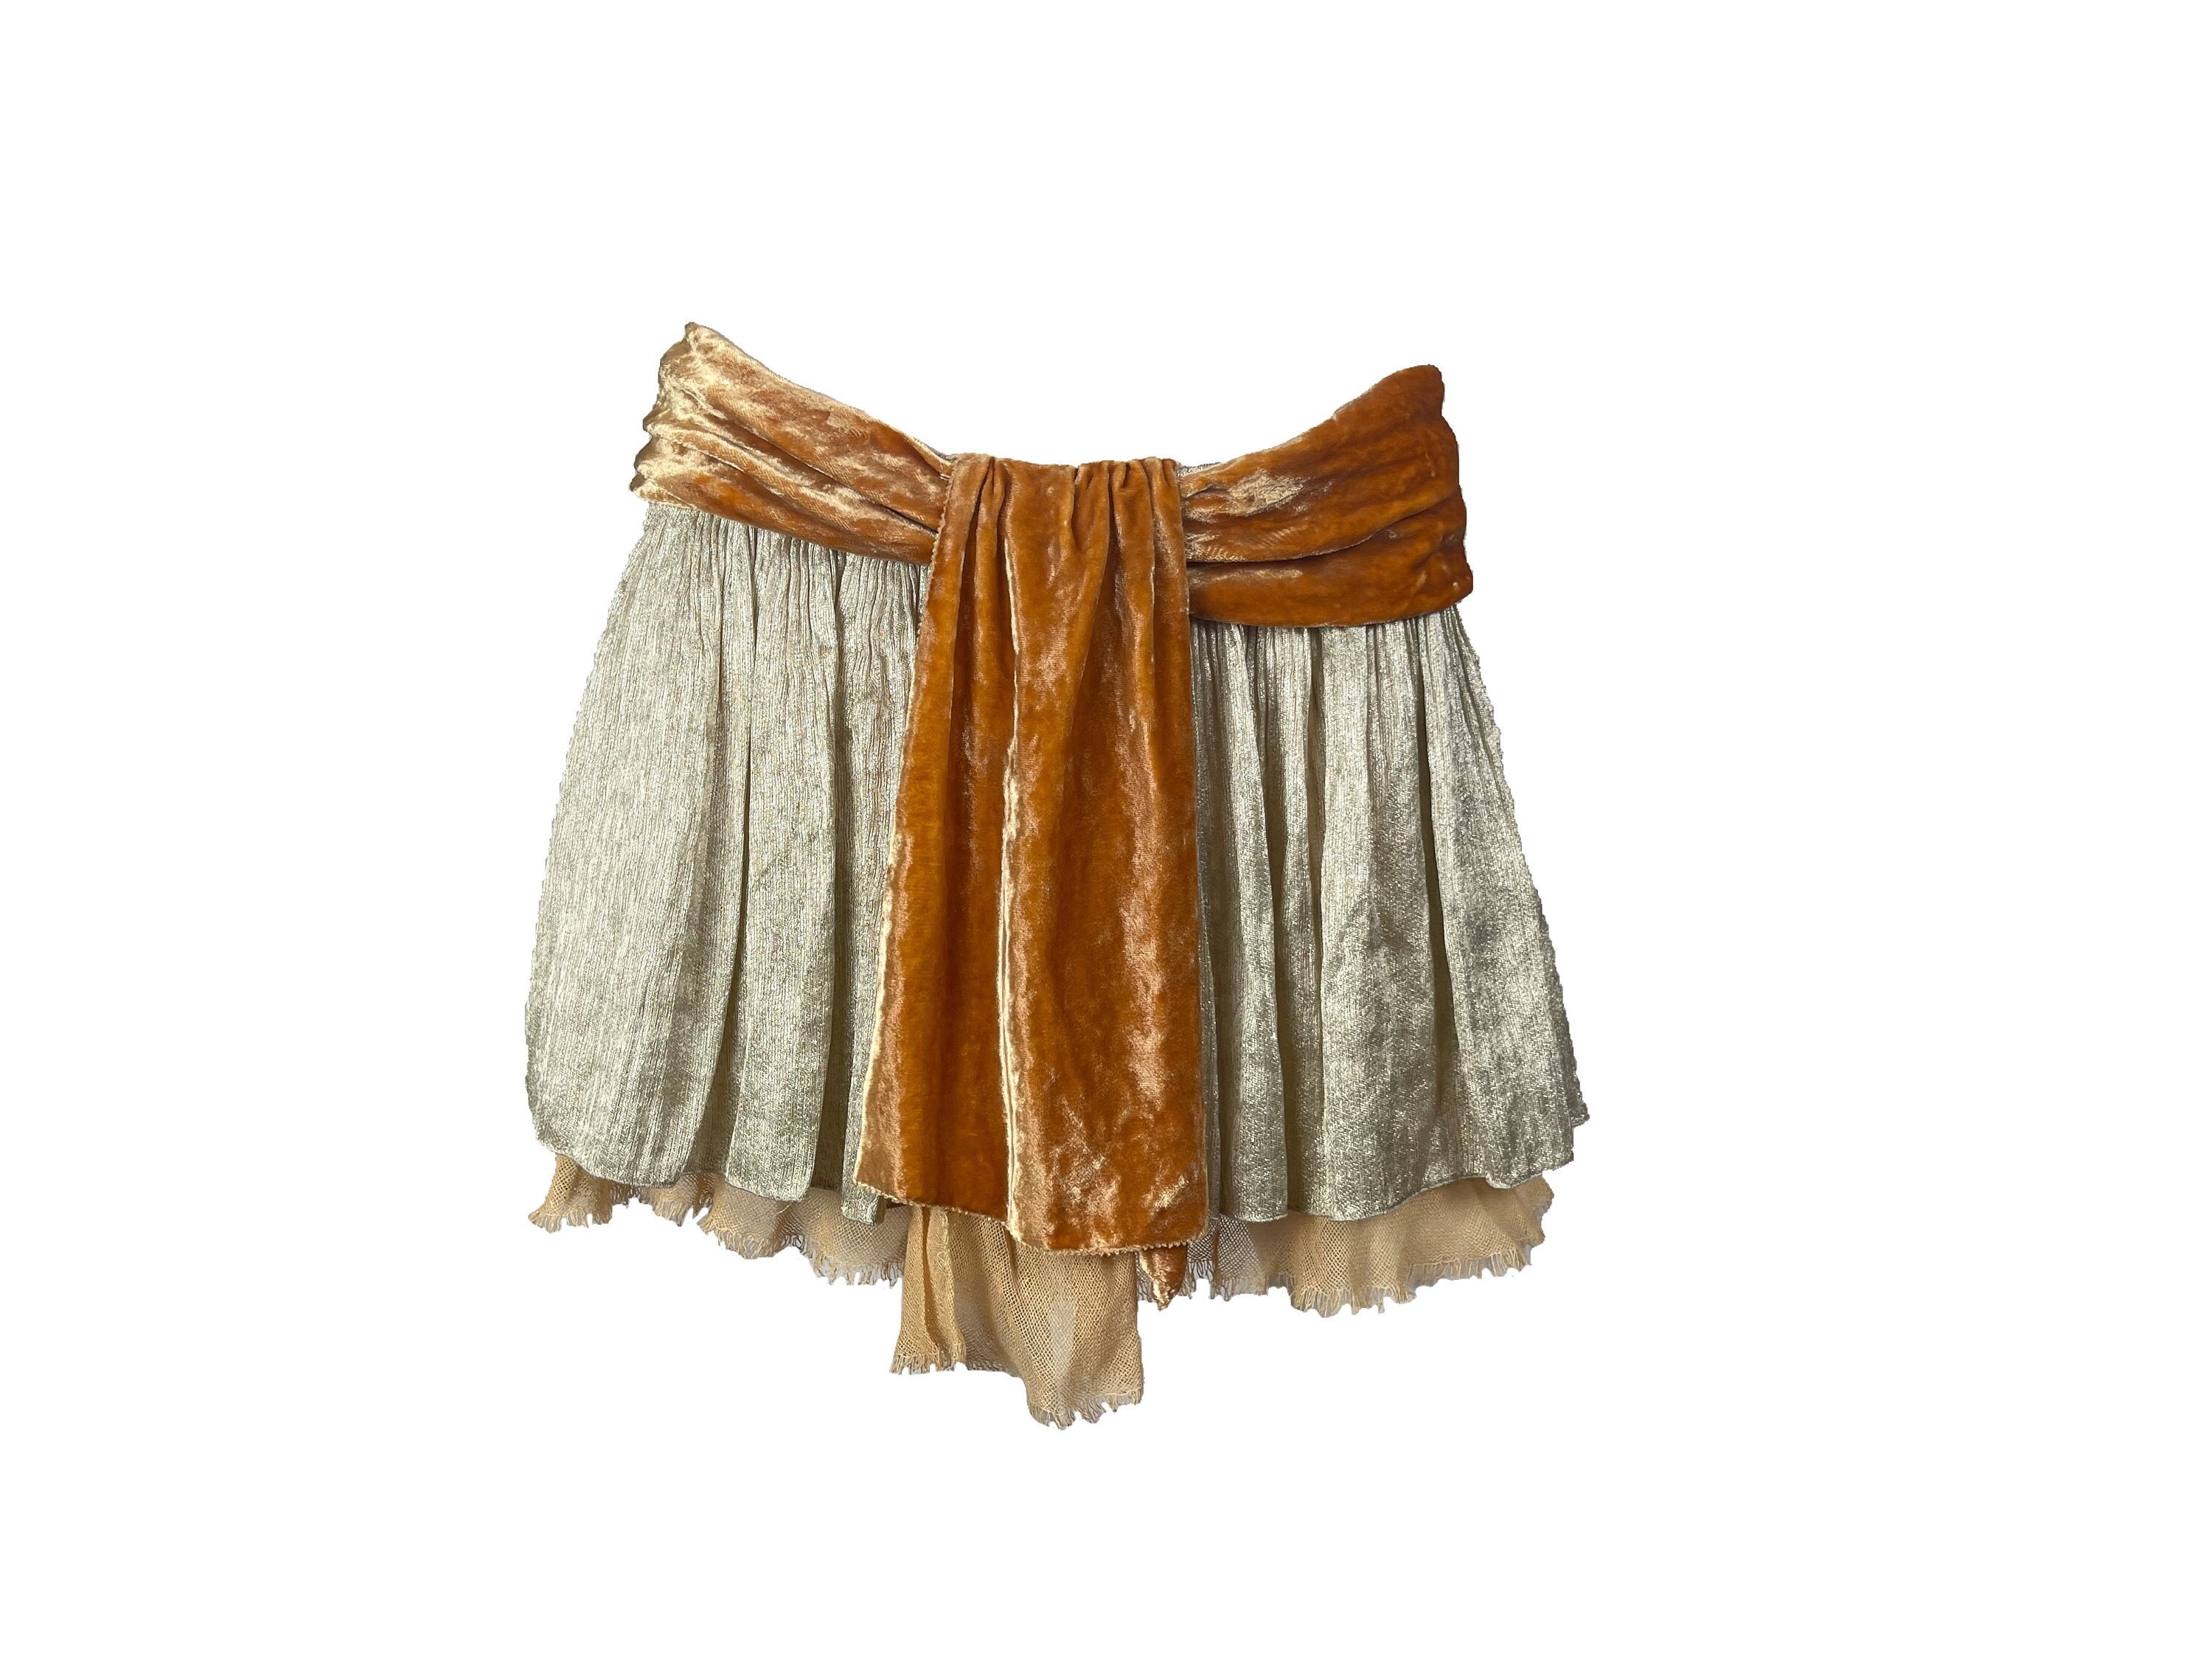 Products by Louis Vuitton: Monogram Relief Flounce Wrap Skirt in